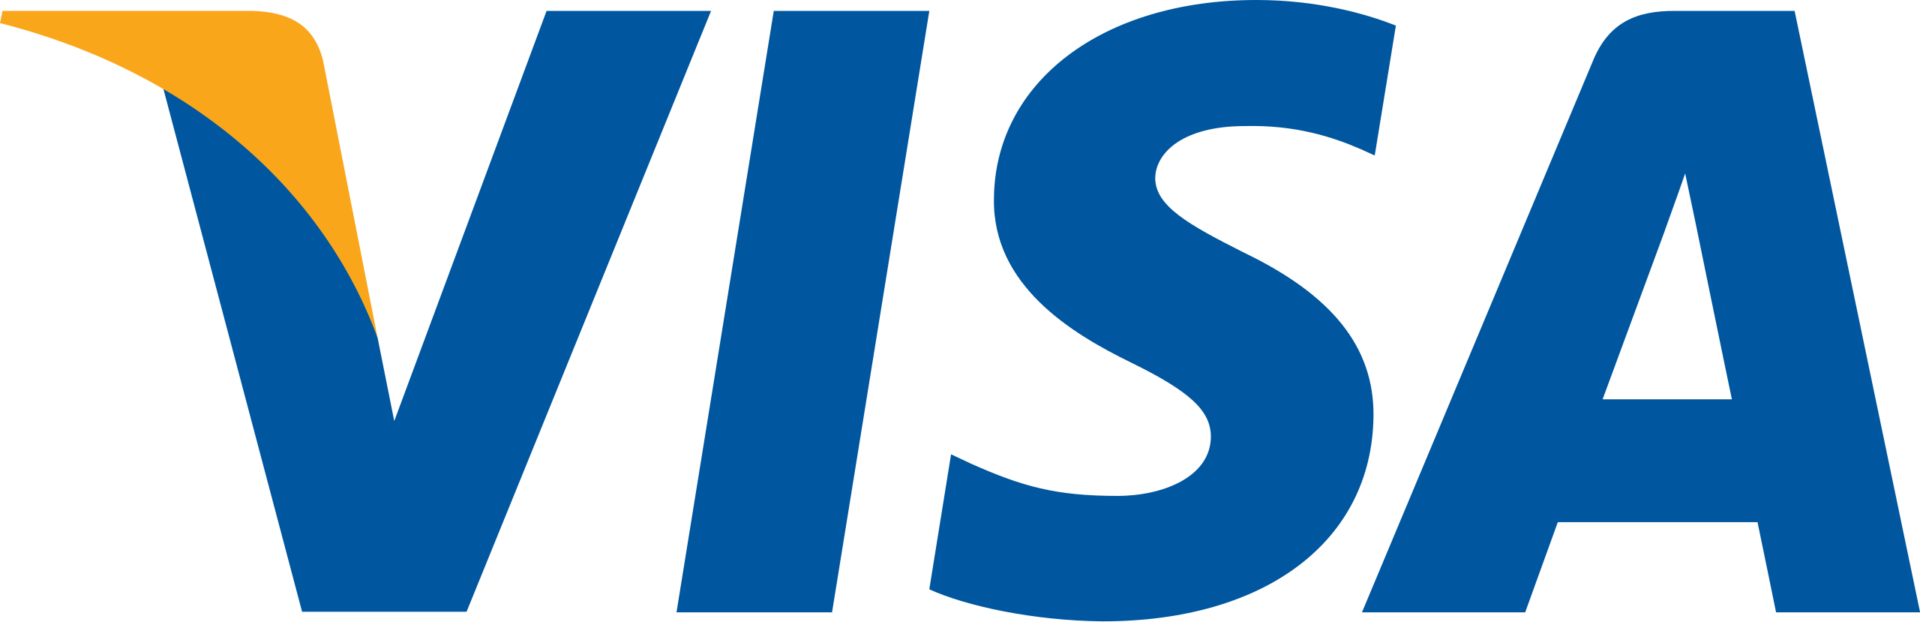 A blue and black logo for the word " vis ".